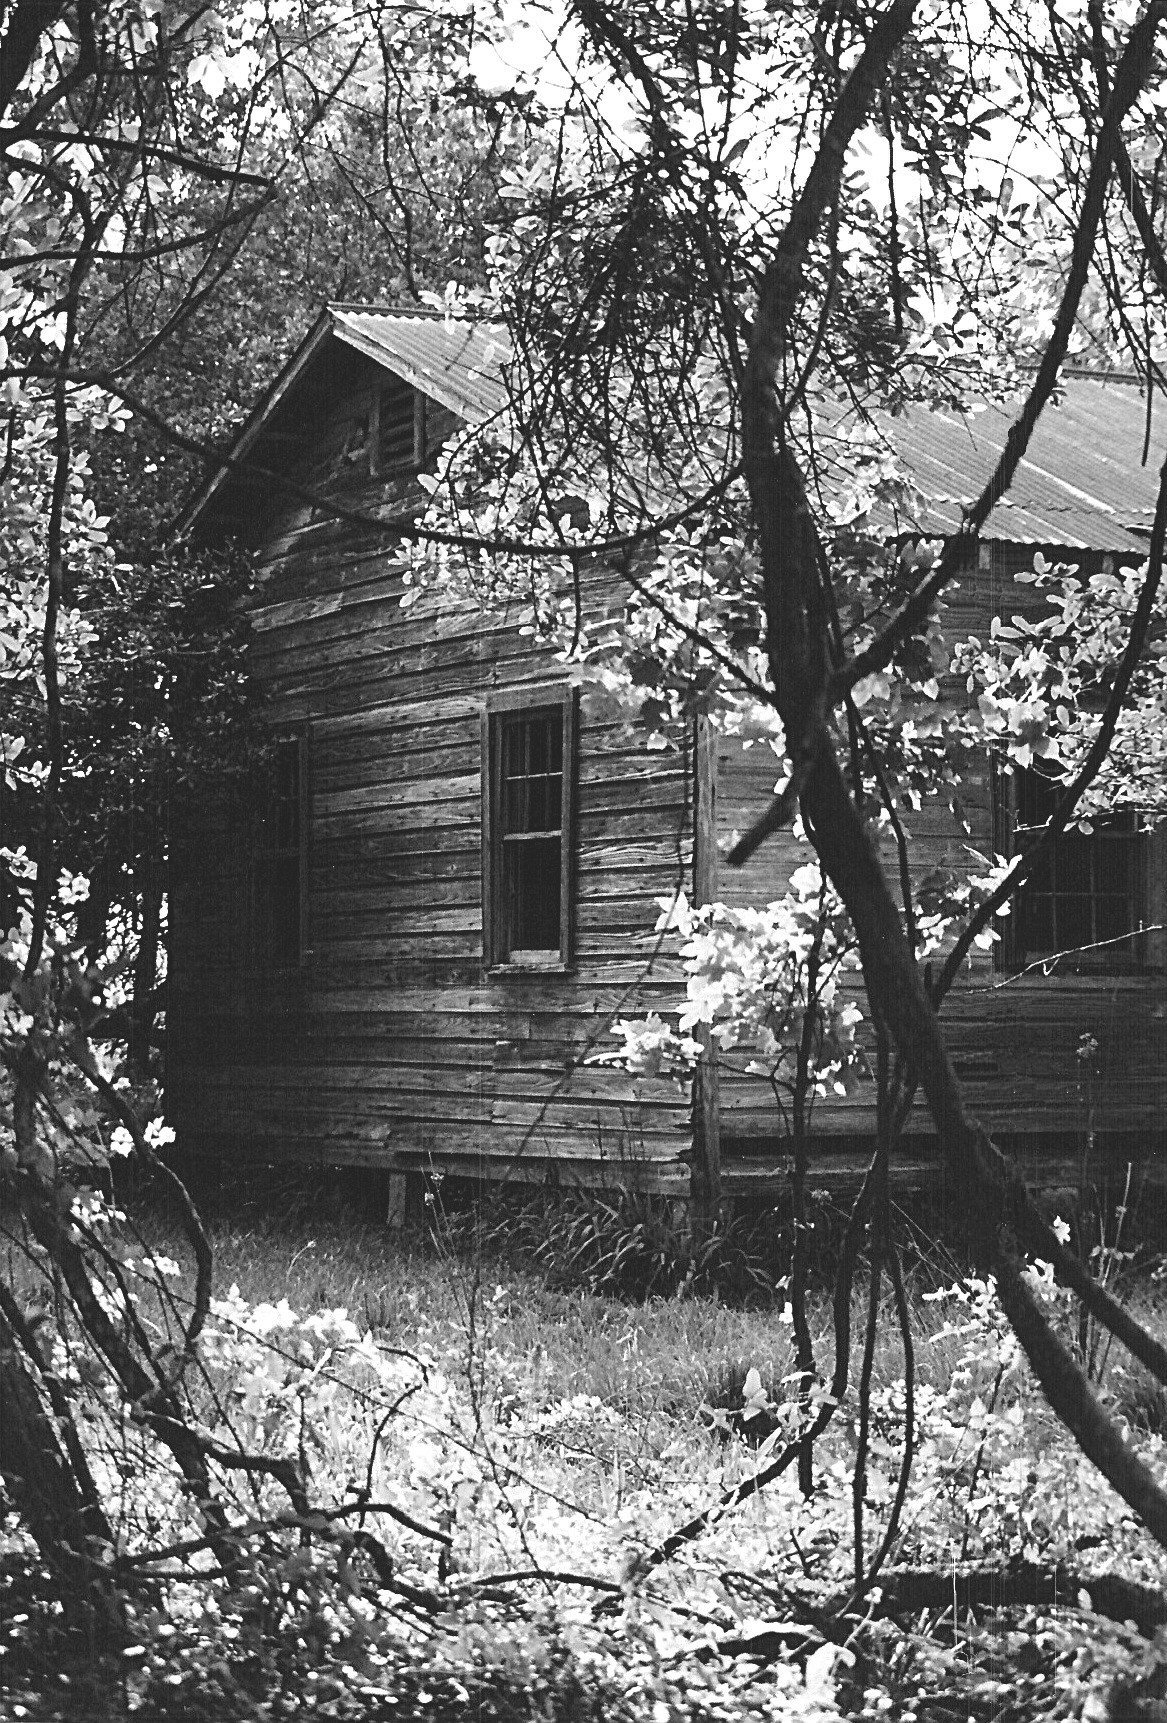 a black and white po of a cabin in the woods